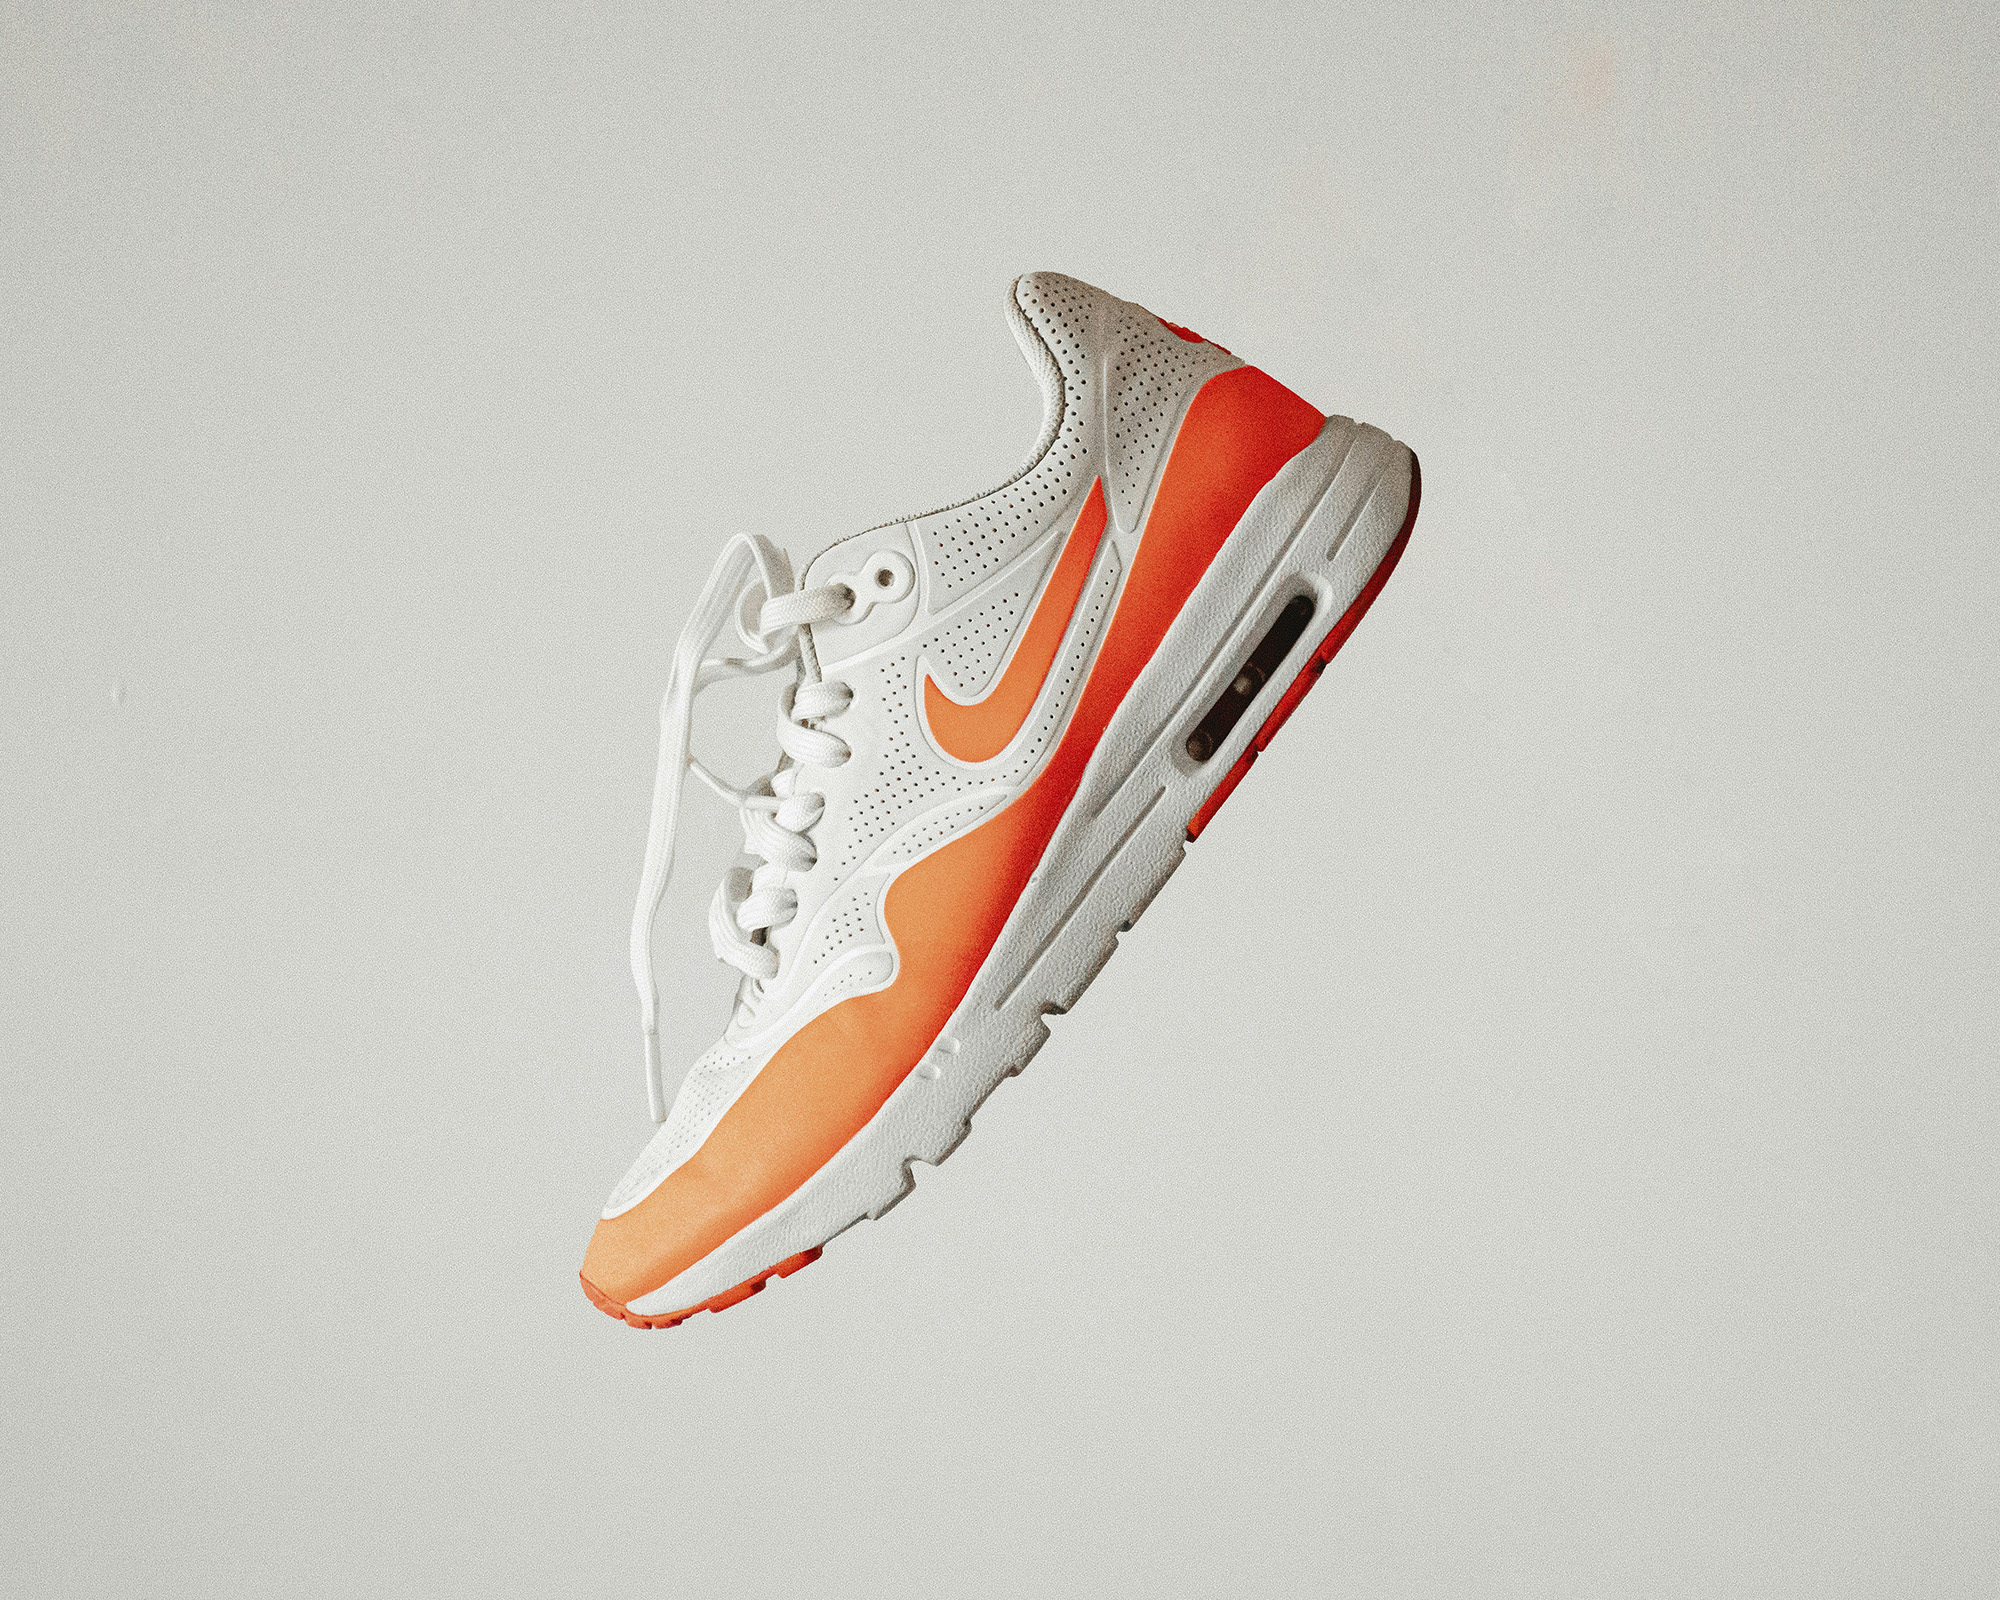 “Cultural Icons: Exploring Nike’s Many Geos Inspired by Heritage and Tradition”